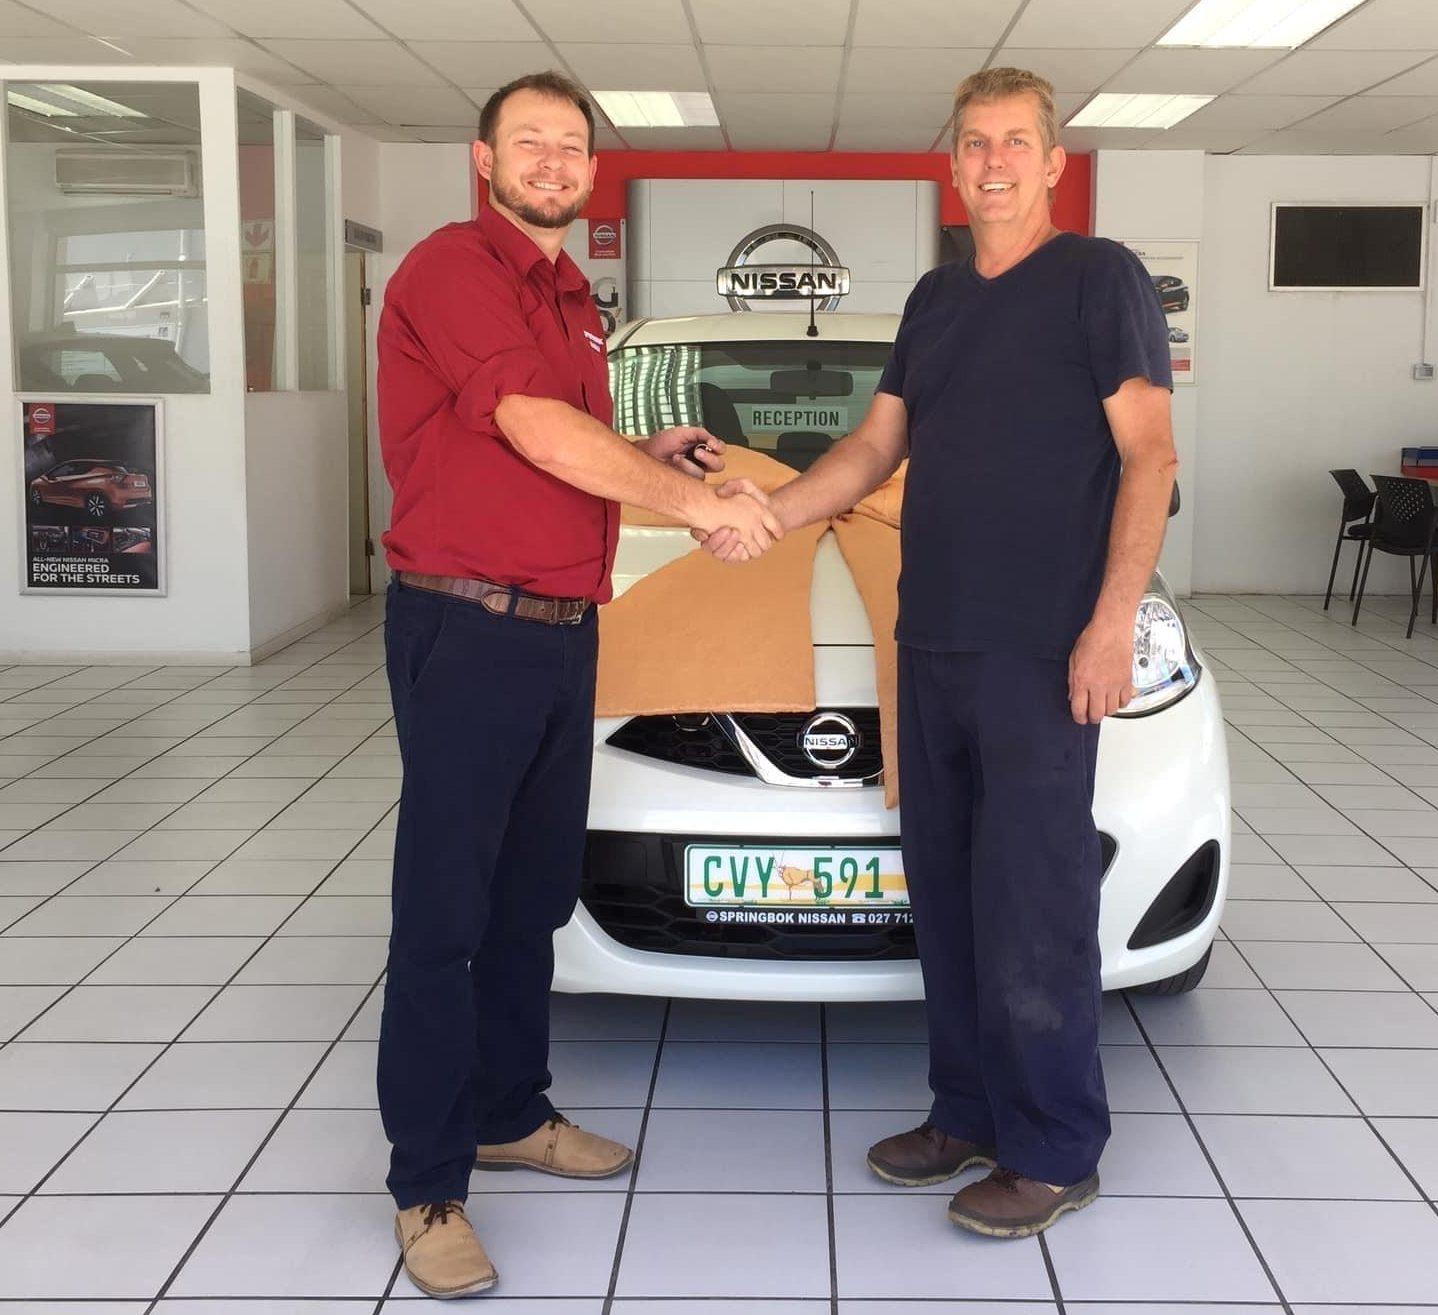 Kobus Spangenberg (left) handing over a vehicle to a client, Lionel Richards.